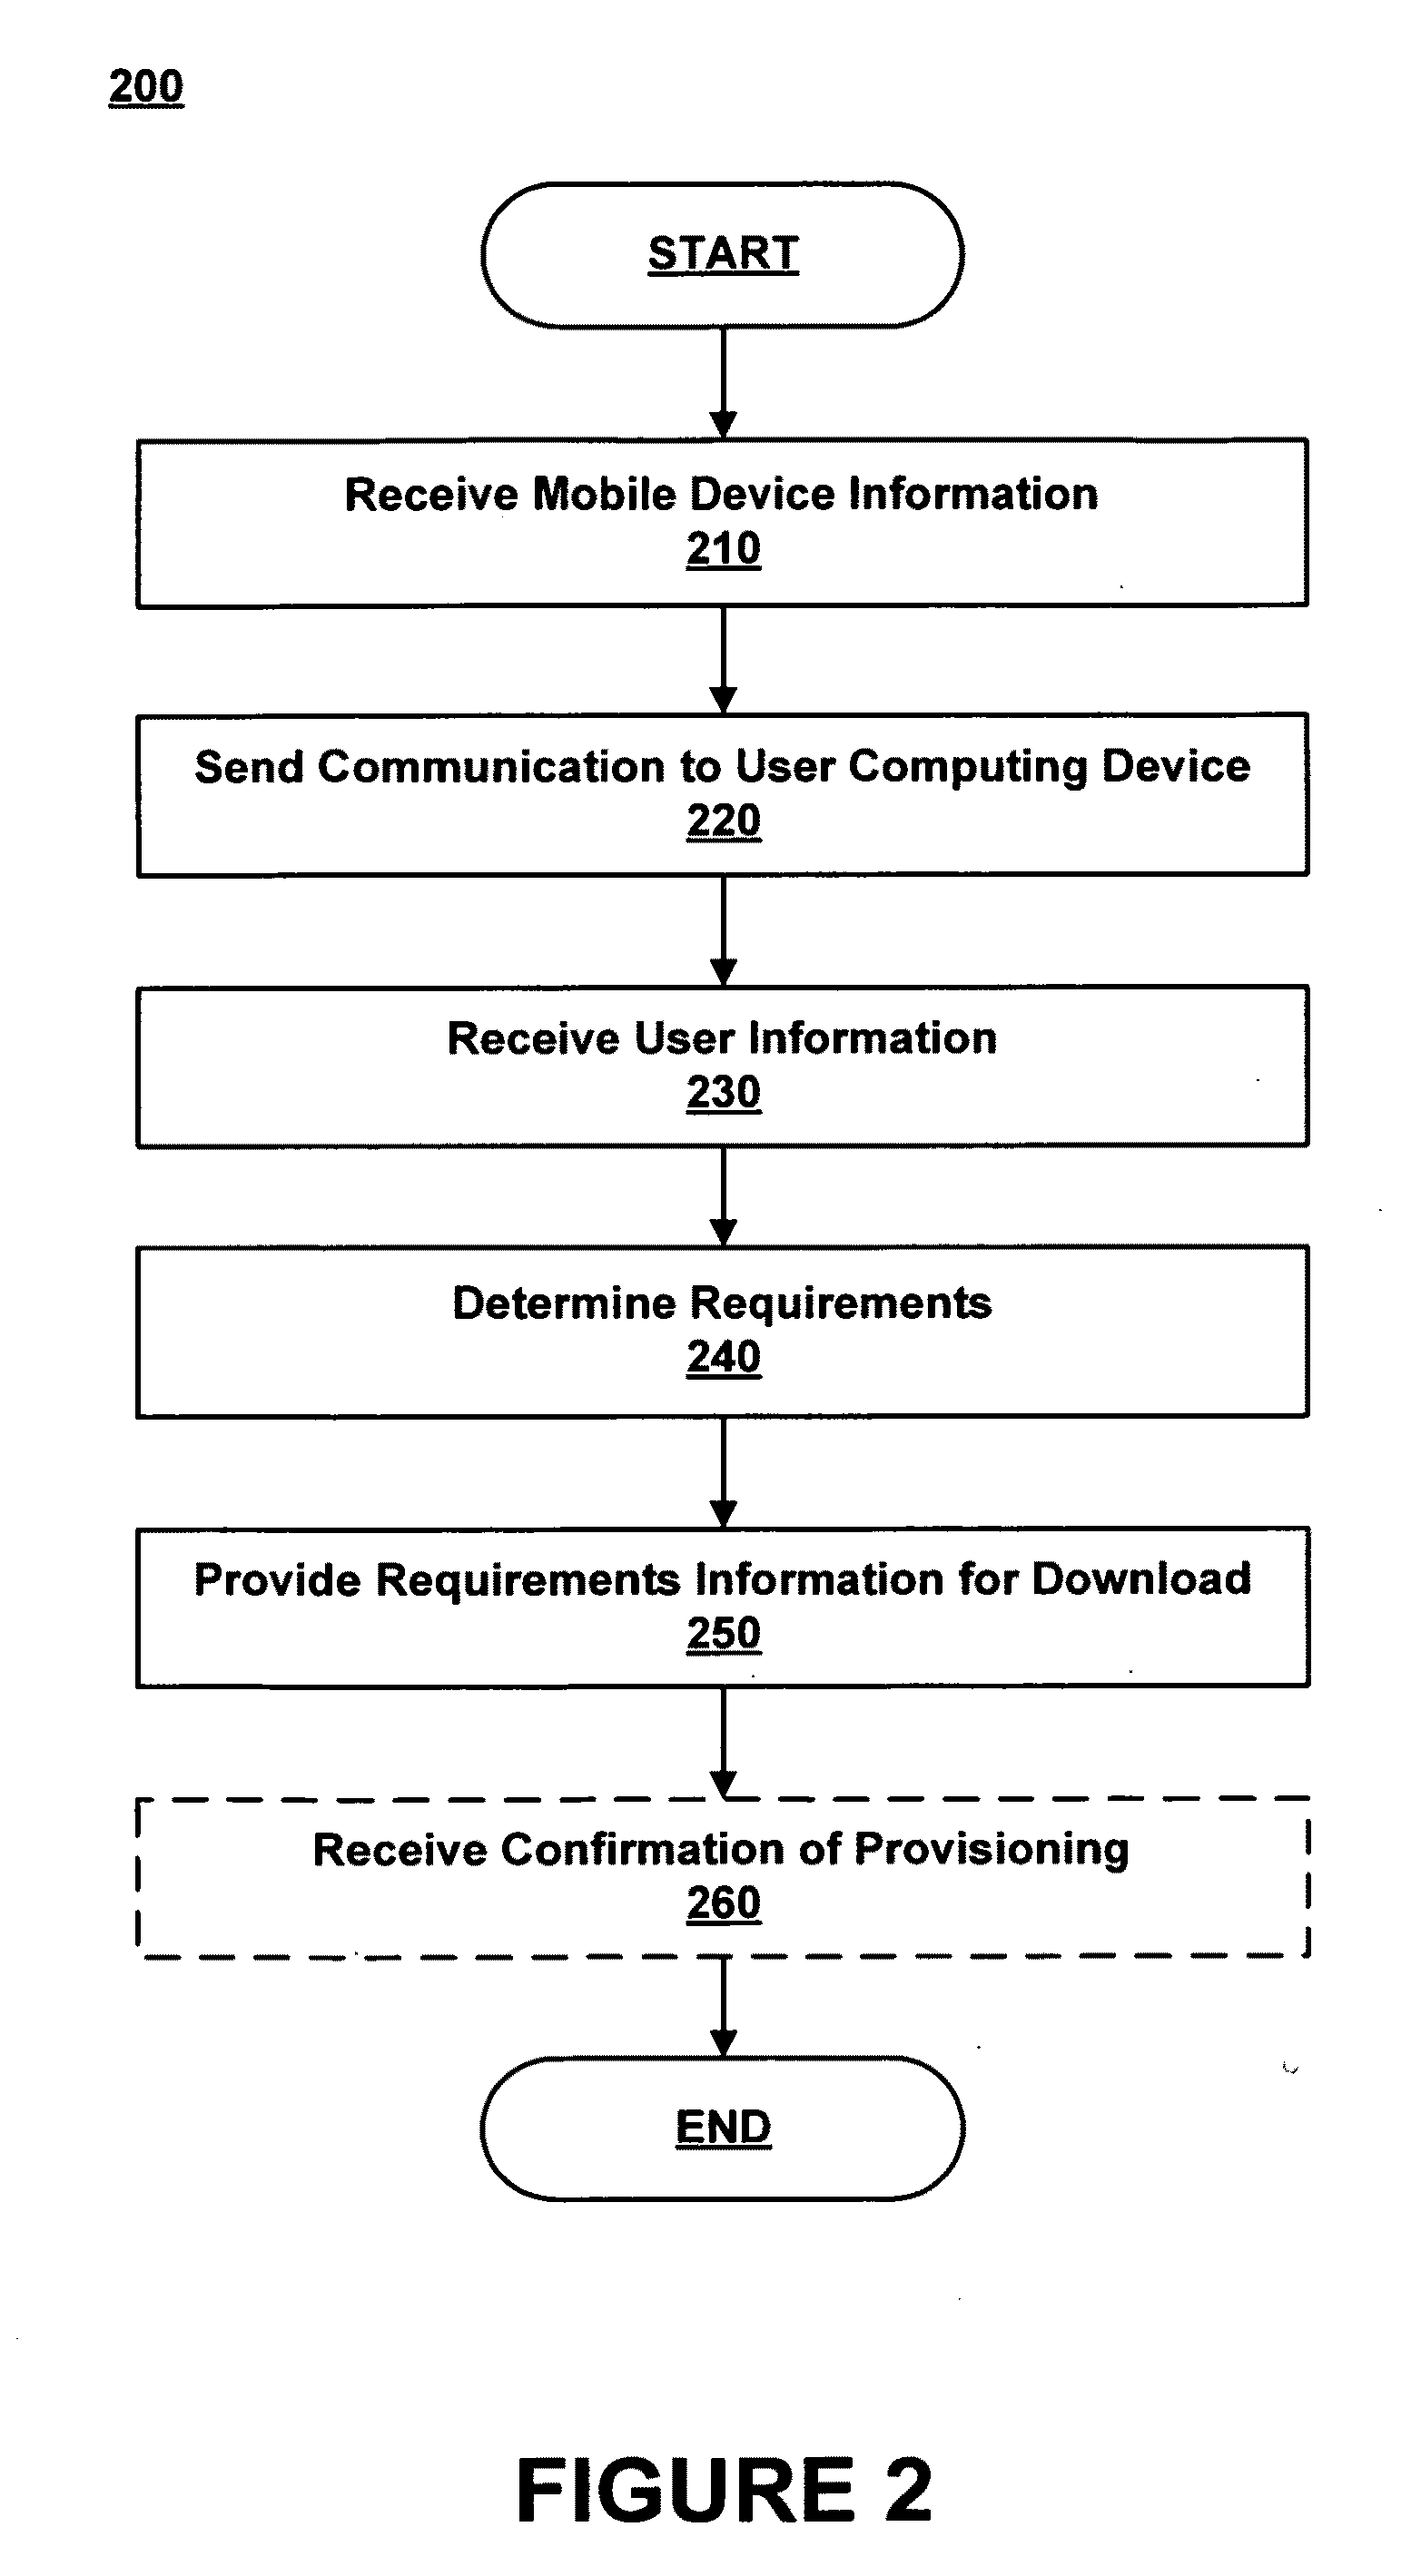 Provisioning applications for a mobile device